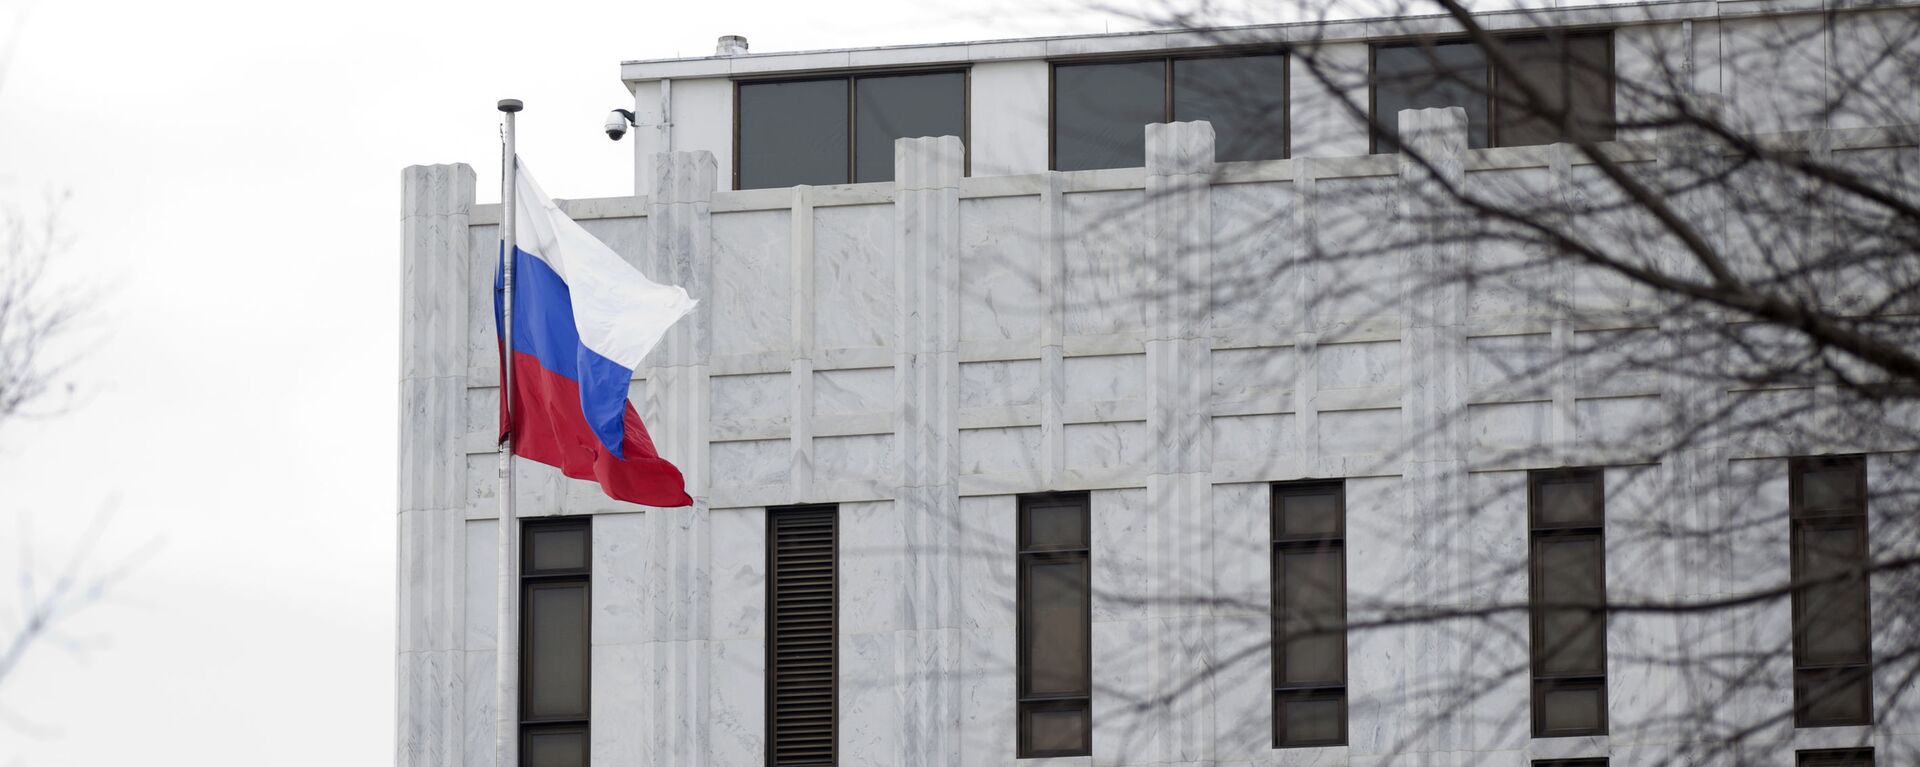 The Russian flag flies over the Russian embassy in Washington, Saturday, March 1, 2014 - Sputnik International, 1920, 20.06.2021